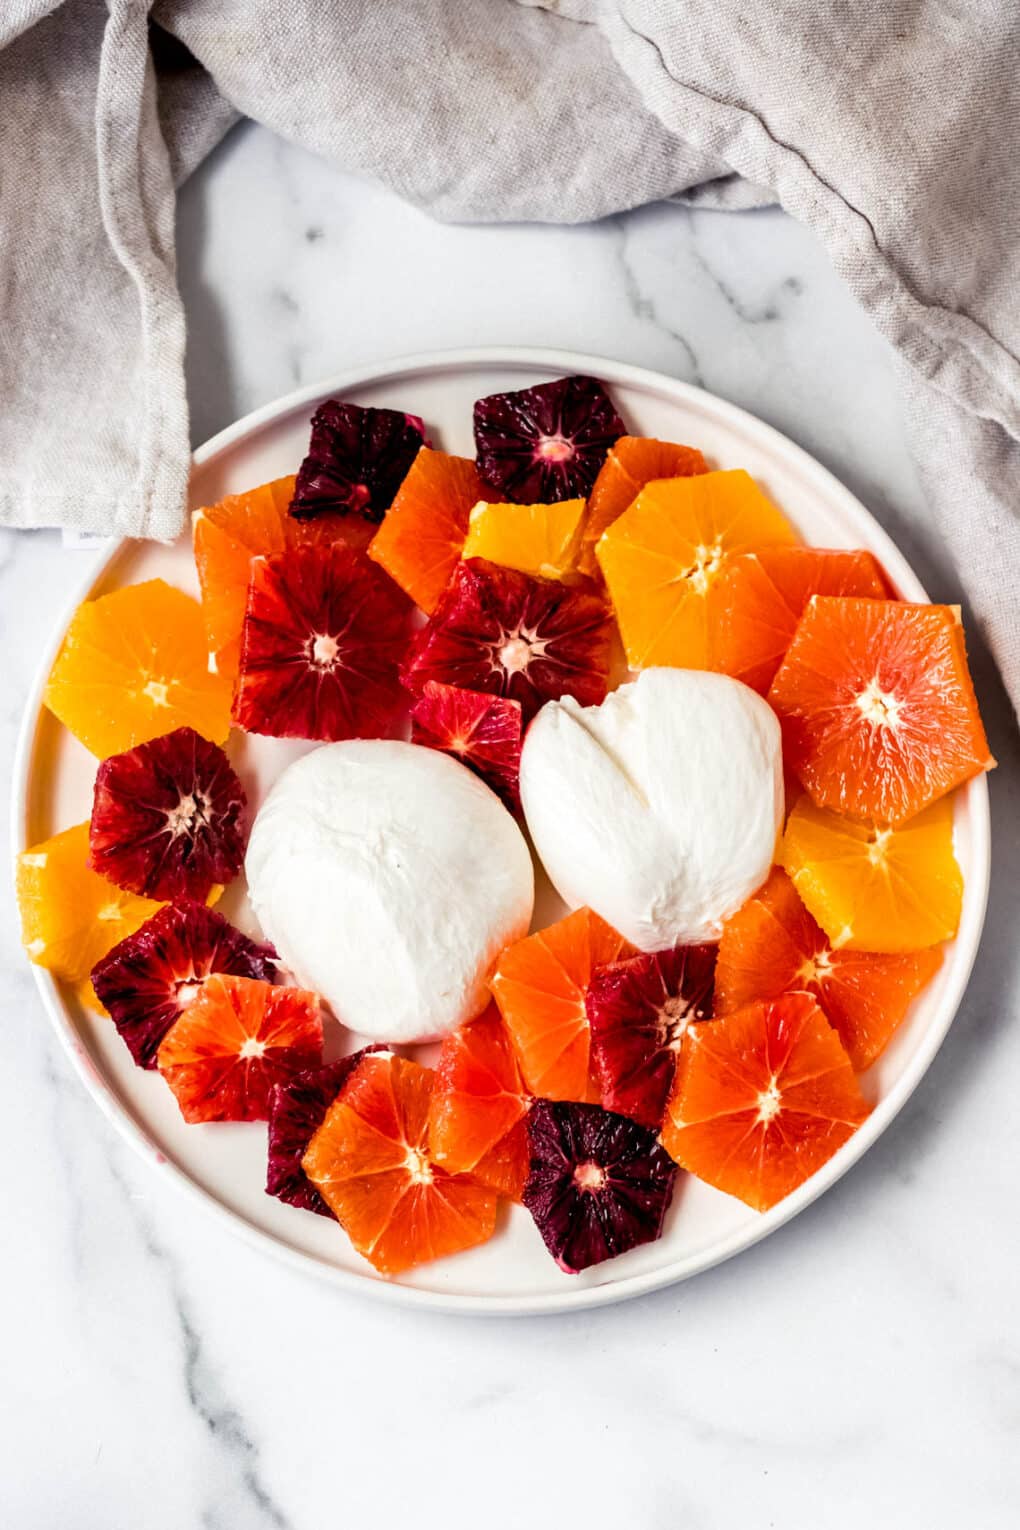 Burrata cheese surrounded by an array of citrus fruits